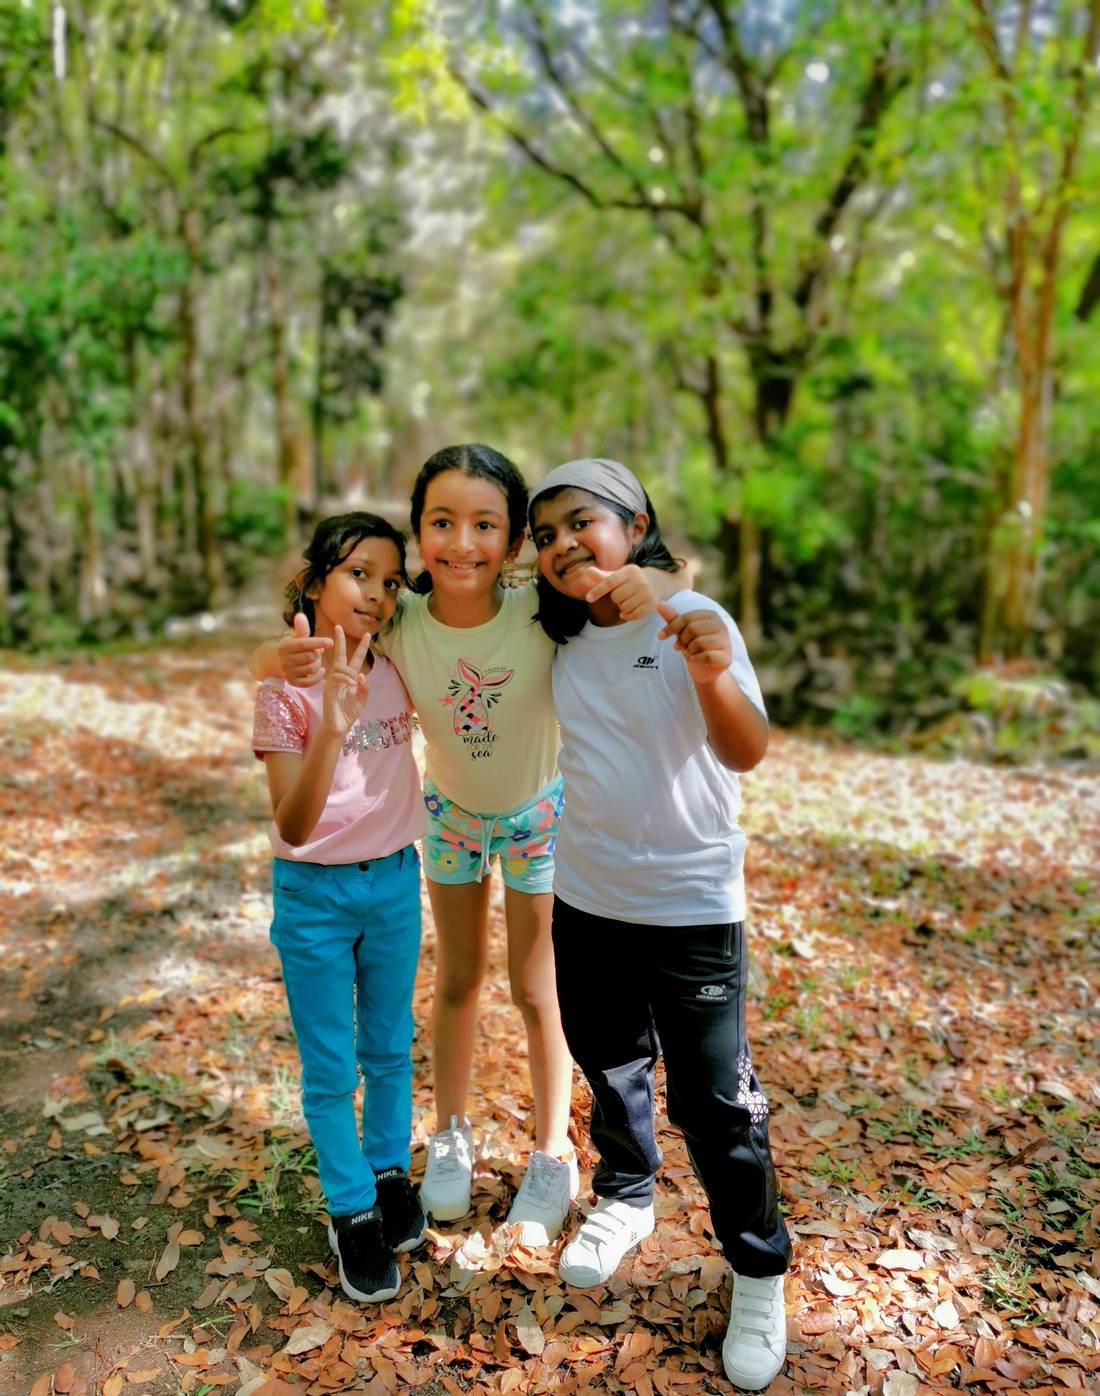 My daughter in the middle with her cousins; Sofia on the right of the picture and Afsheen on the left.